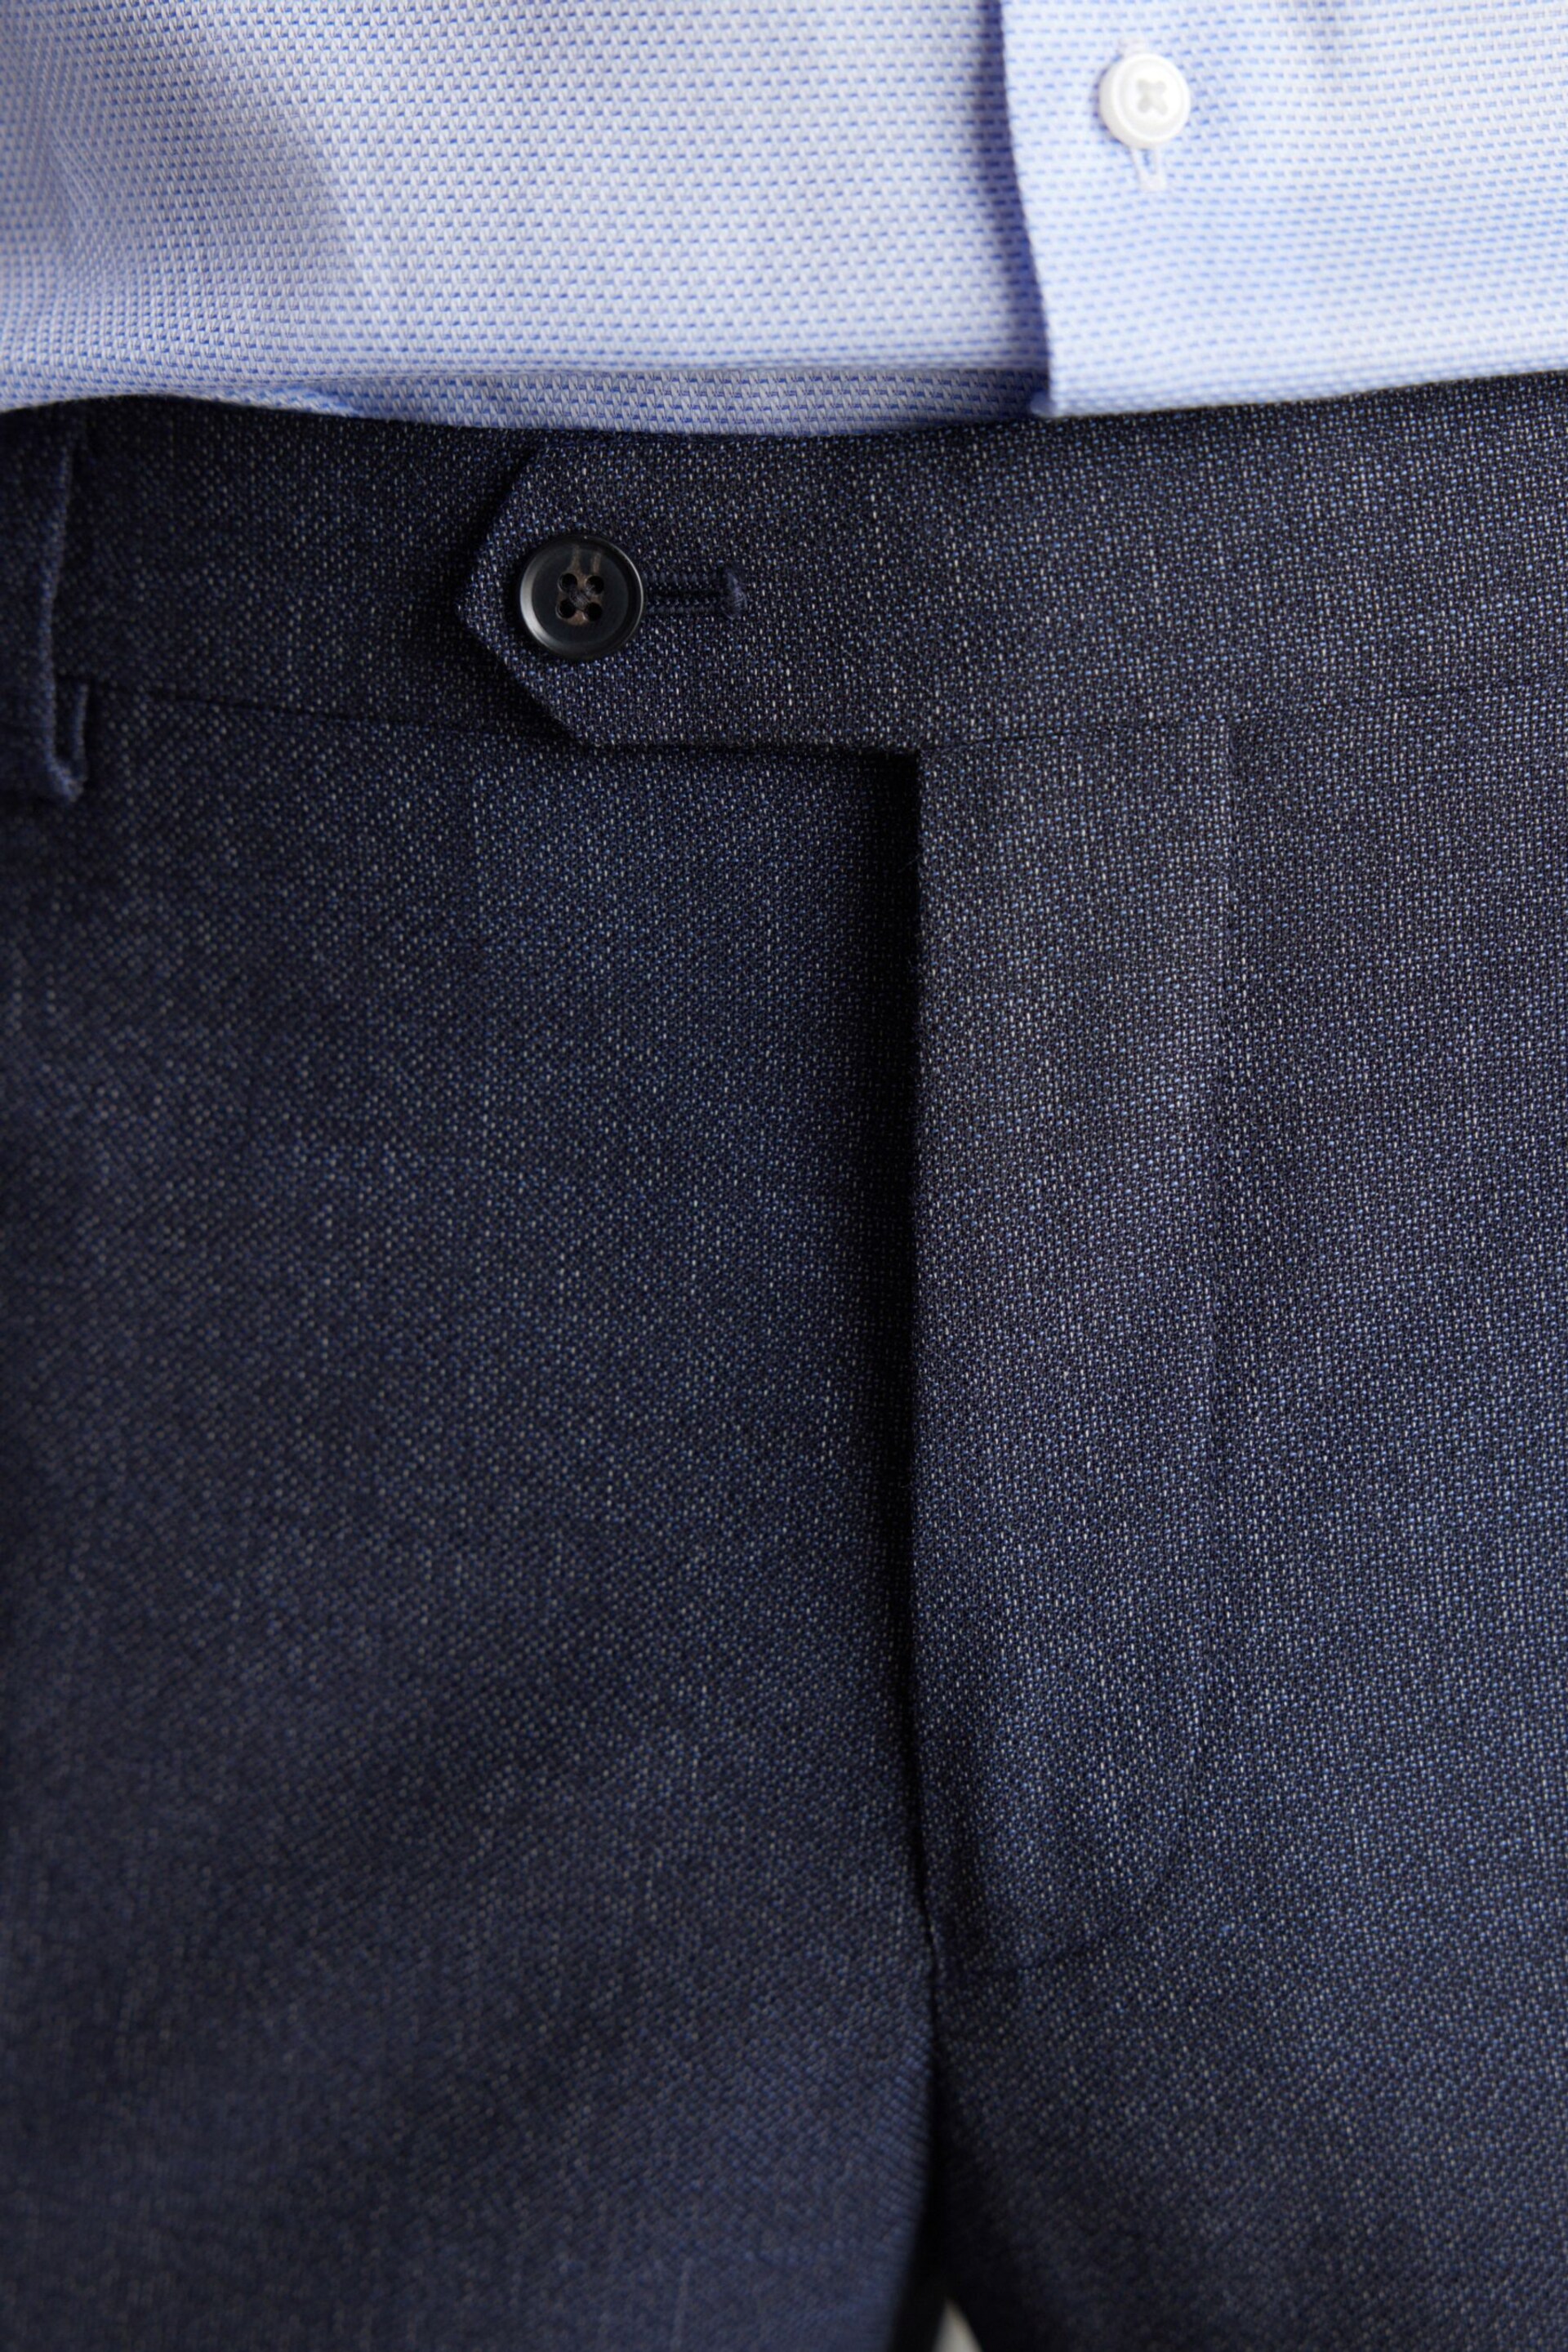 Navy Slim Fit Signature Marzotto Italian Fabric Textured Suit: Trousers - Image 5 of 11